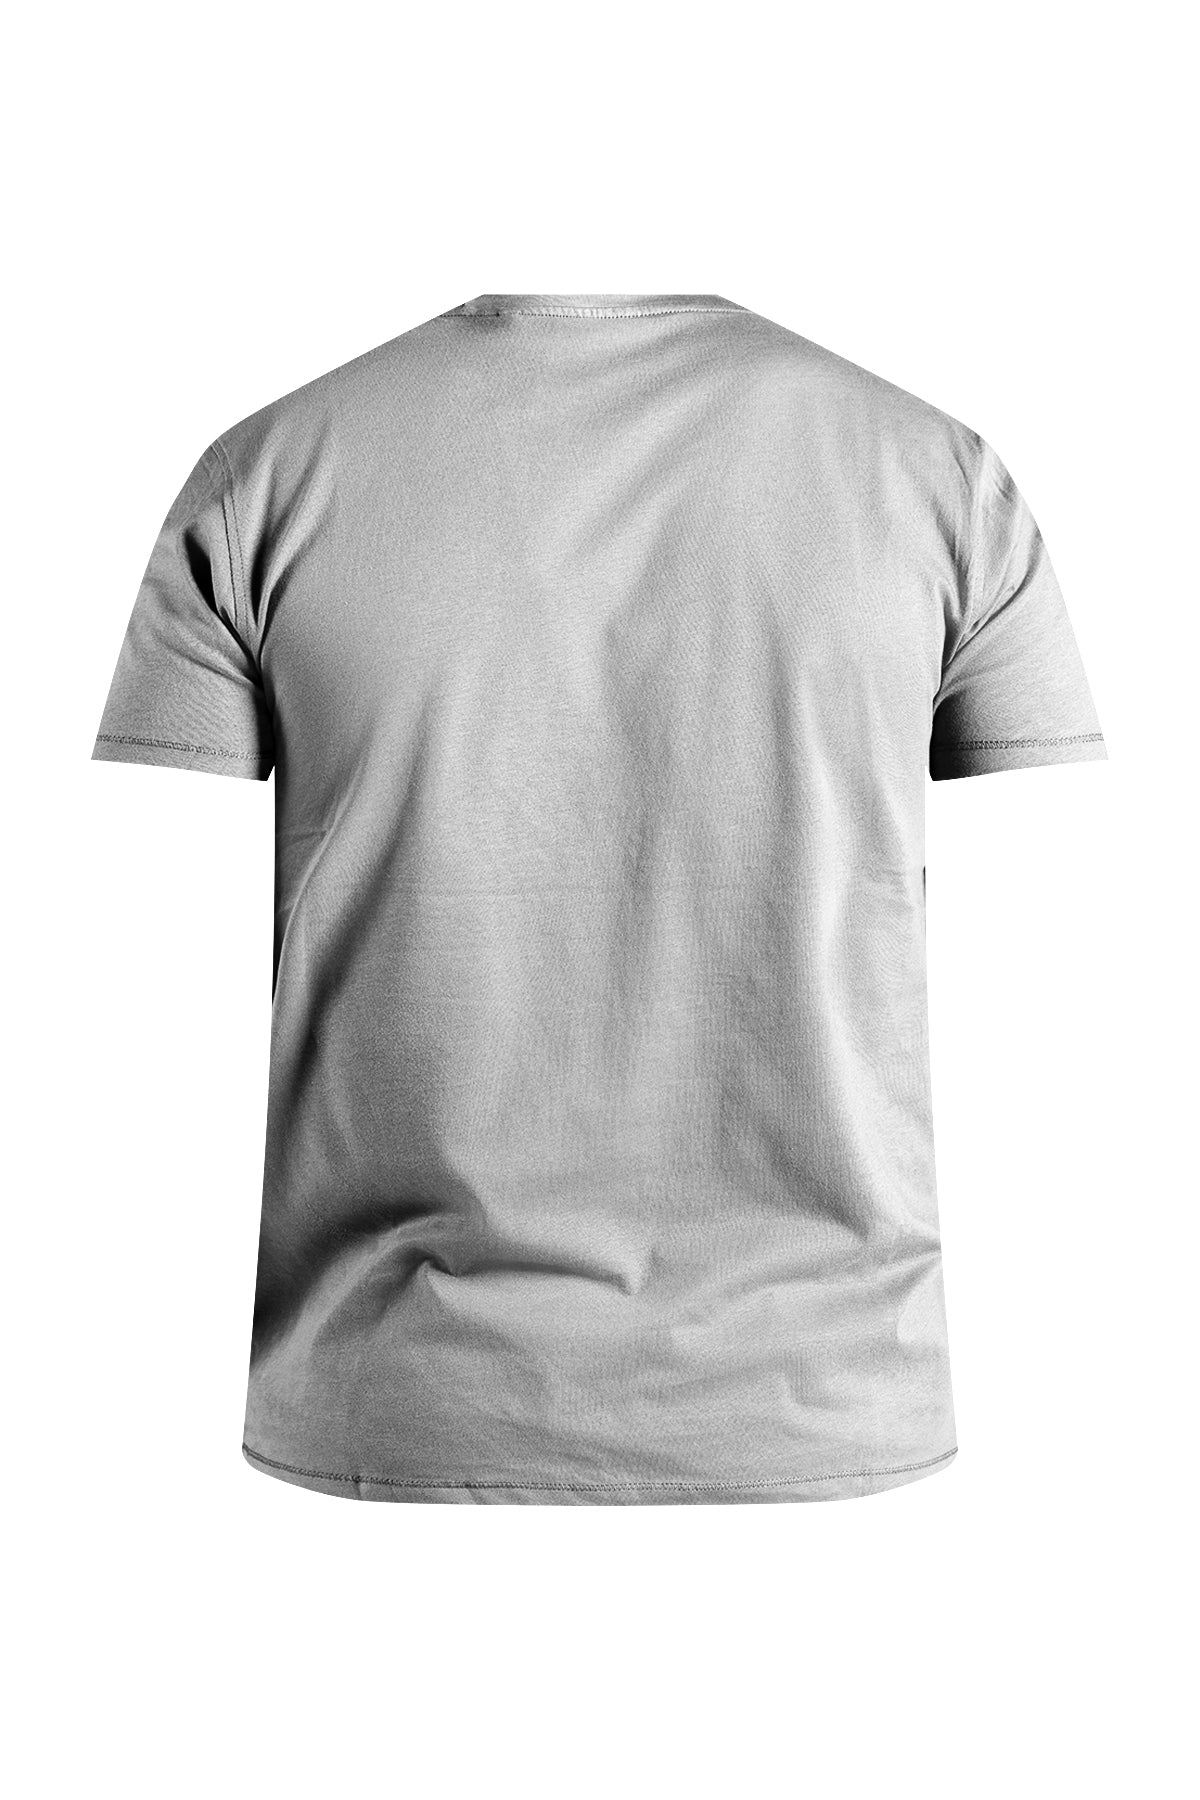 The New Fit Basic Tee (Crew Neck) - XIOS America